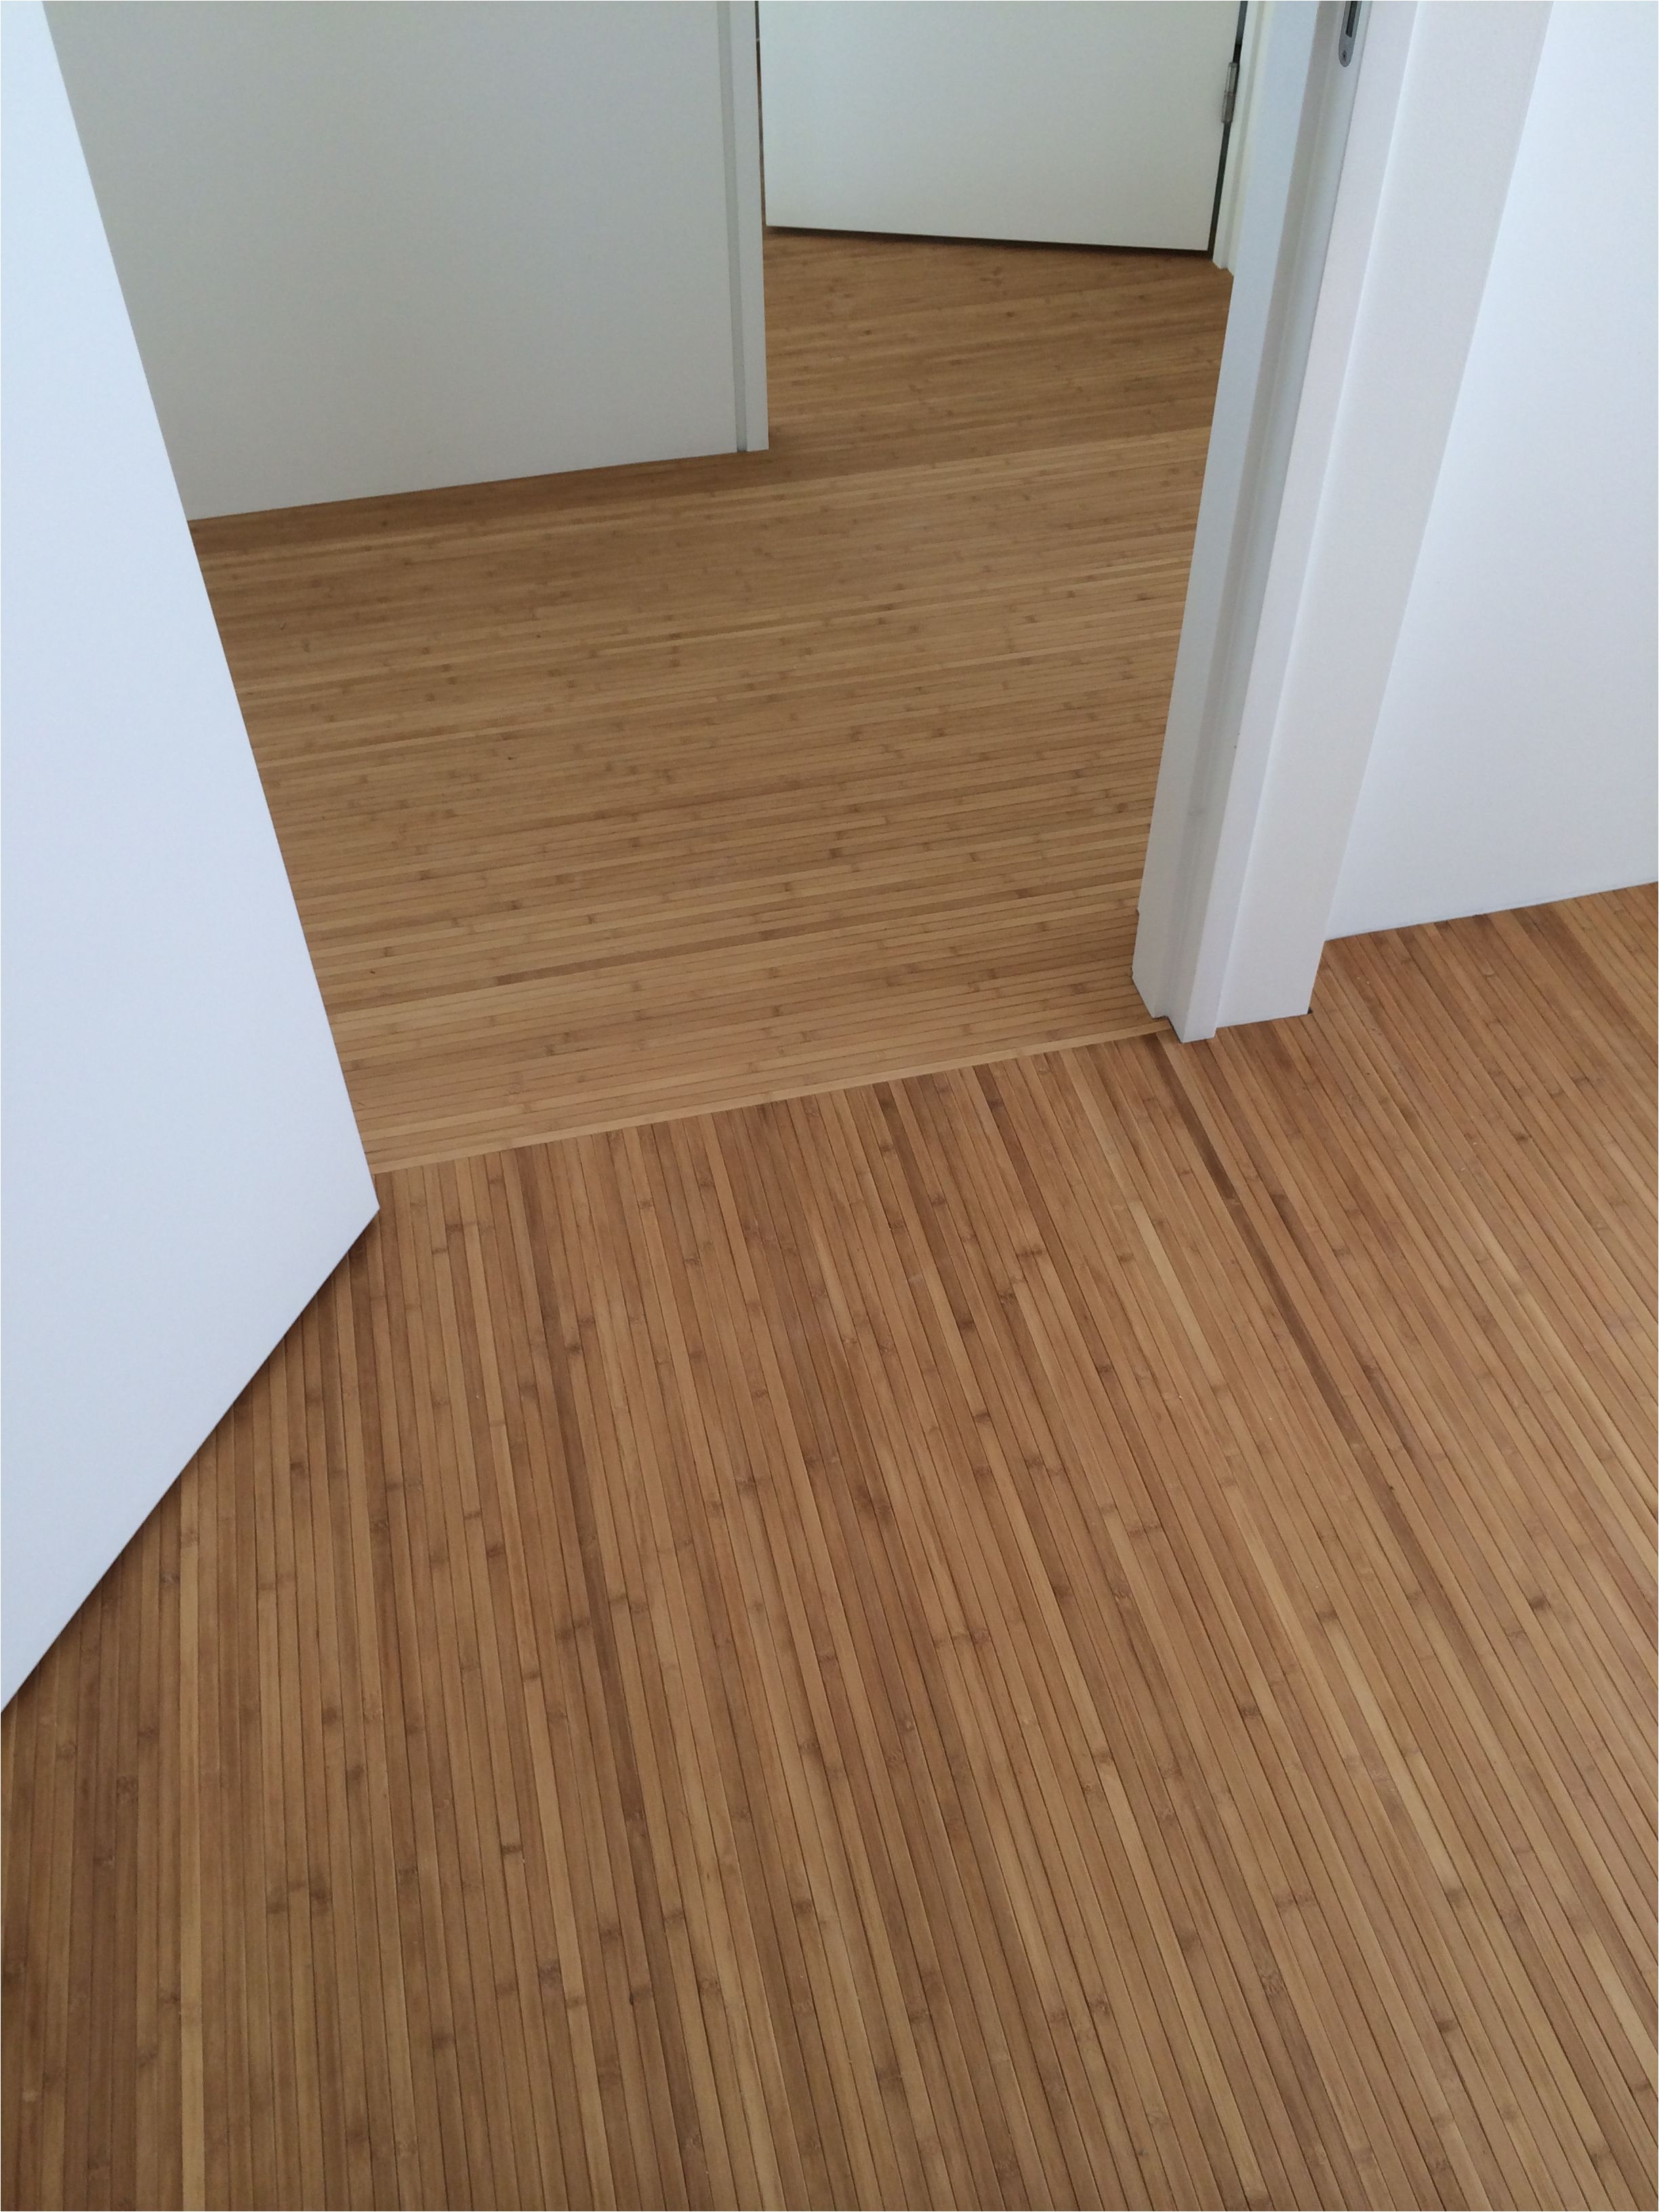 Bamboo Flooring and Dogs Urine Bamboo Flooring Pros and Cons Home Design